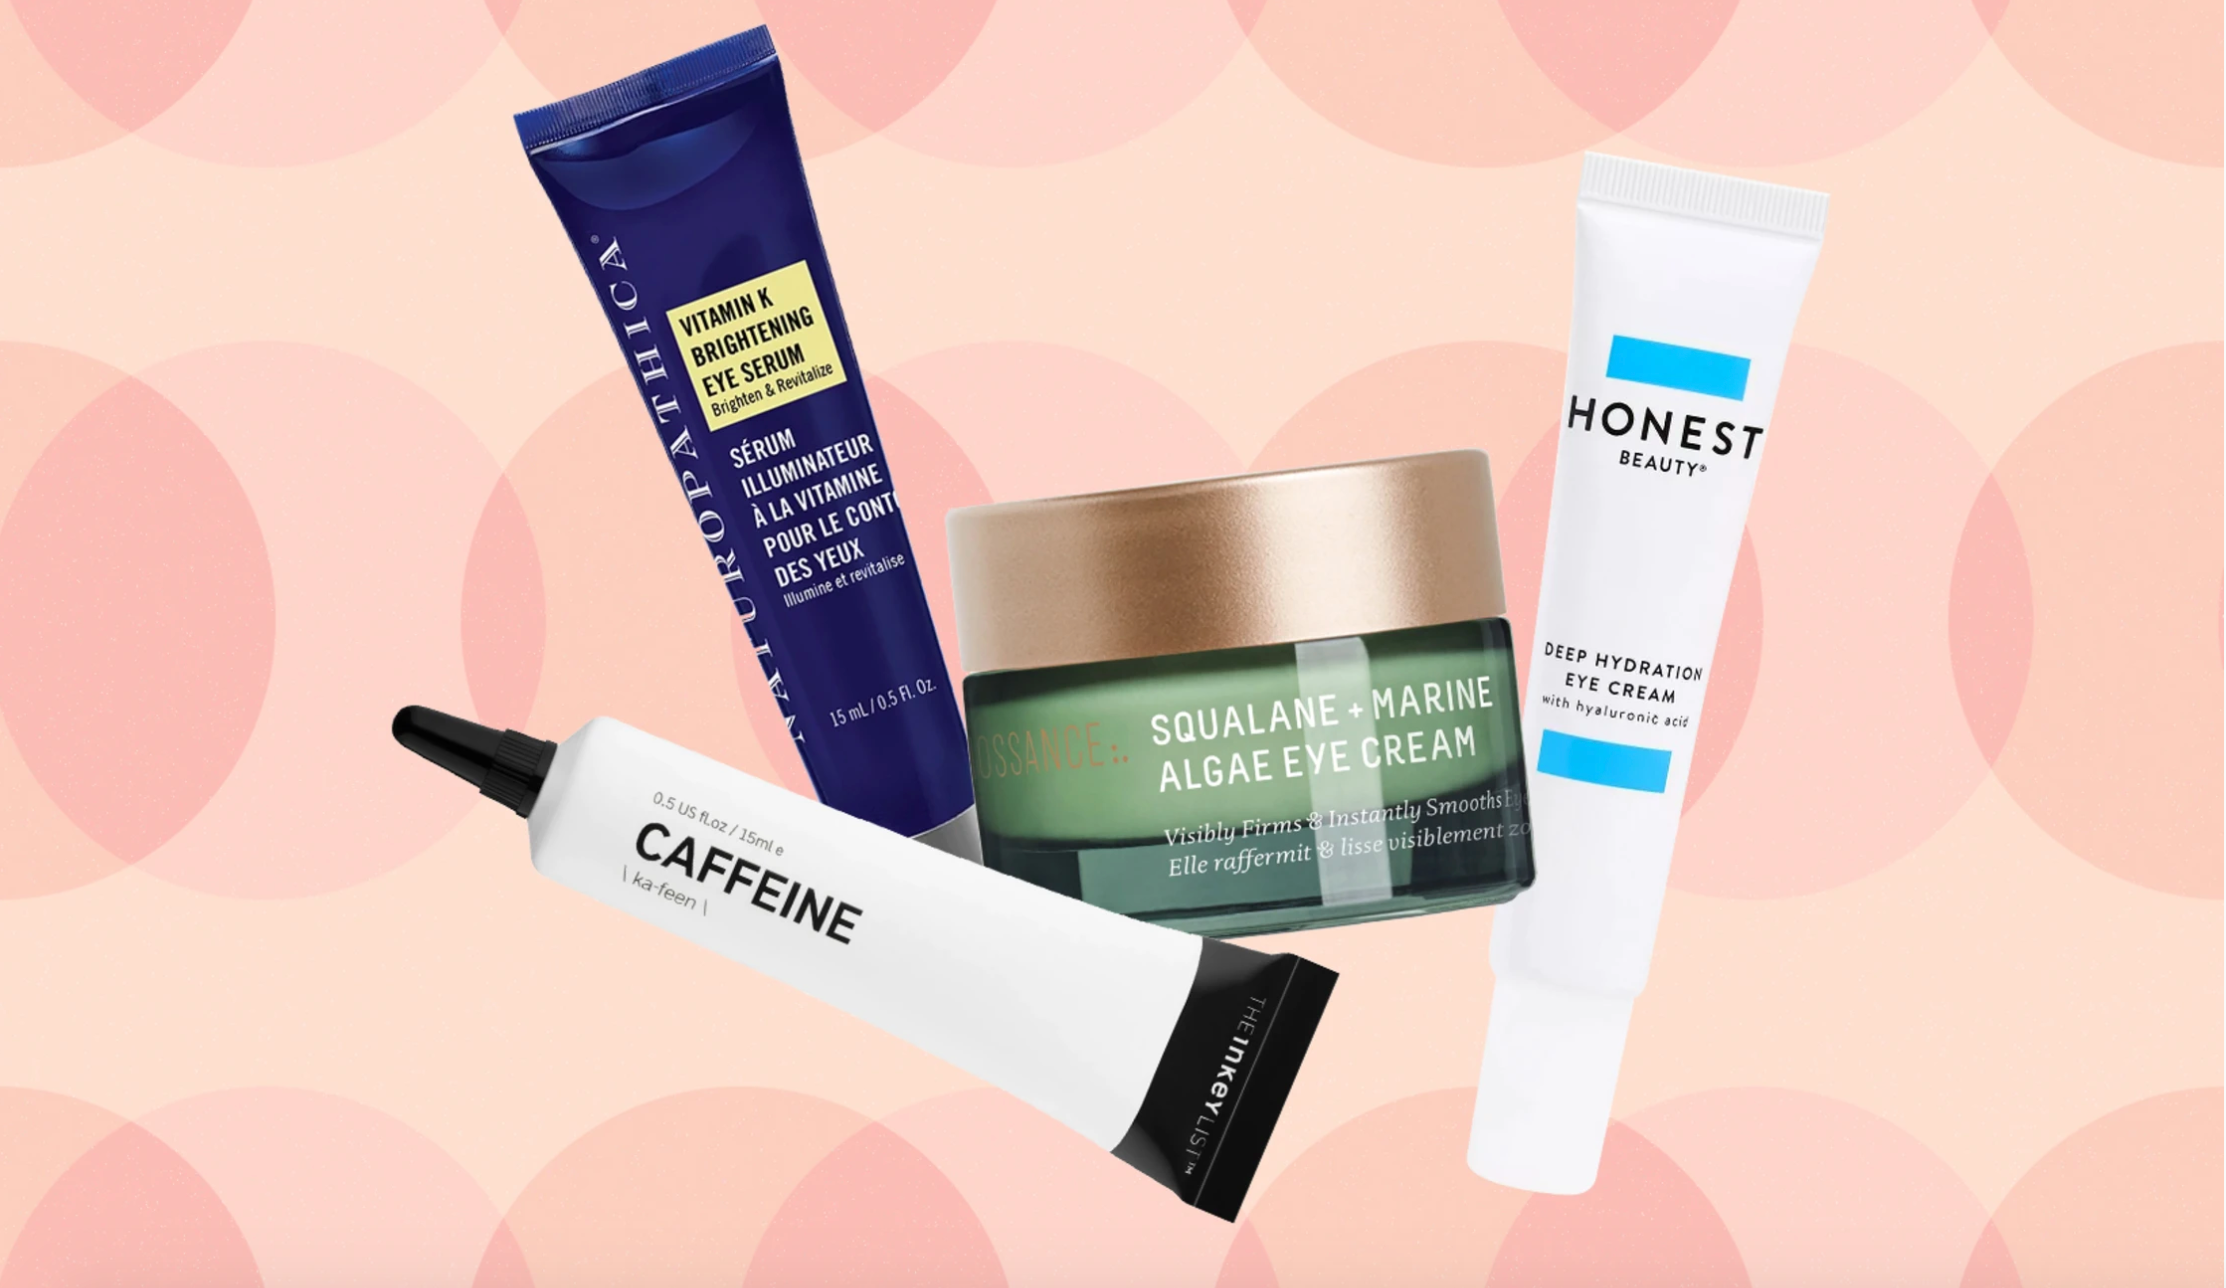 The 9 Best Clean, Natural & Organic Eye Creams For Circles & Bags